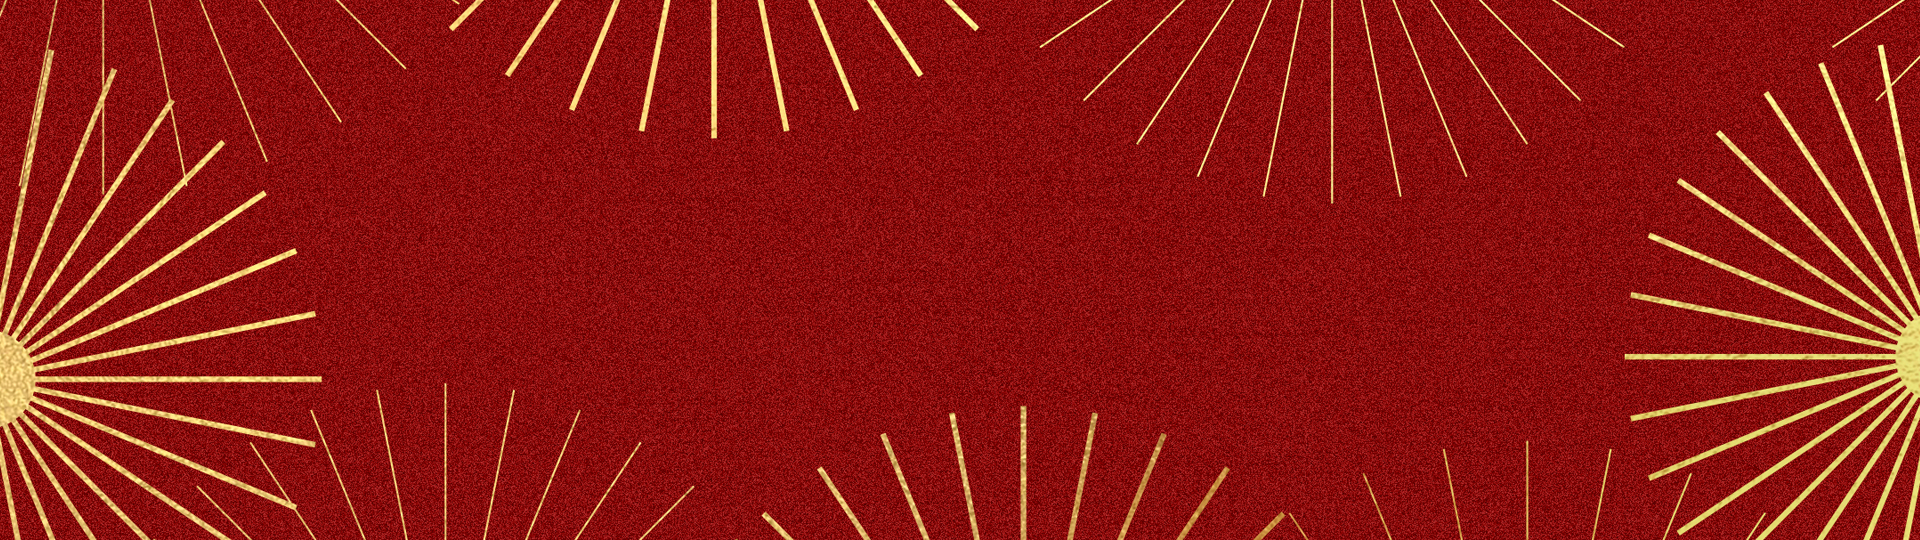 Christmas ecards design example of gold stars bursting against a red background